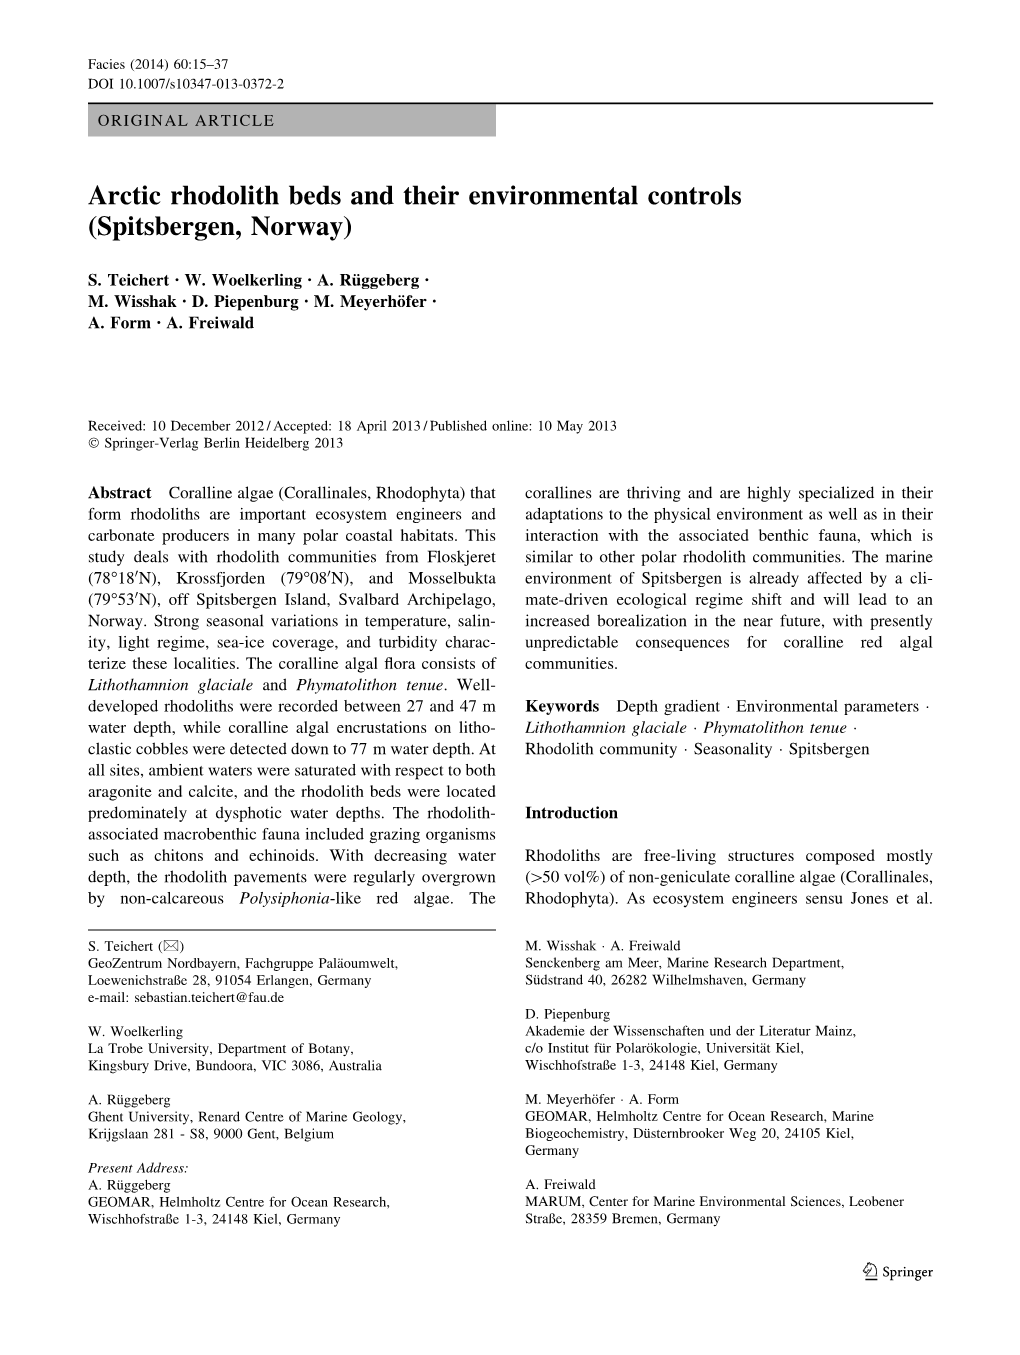 Arctic Rhodolith Beds and Their Environmental Controls (Spitsbergen, Norway)